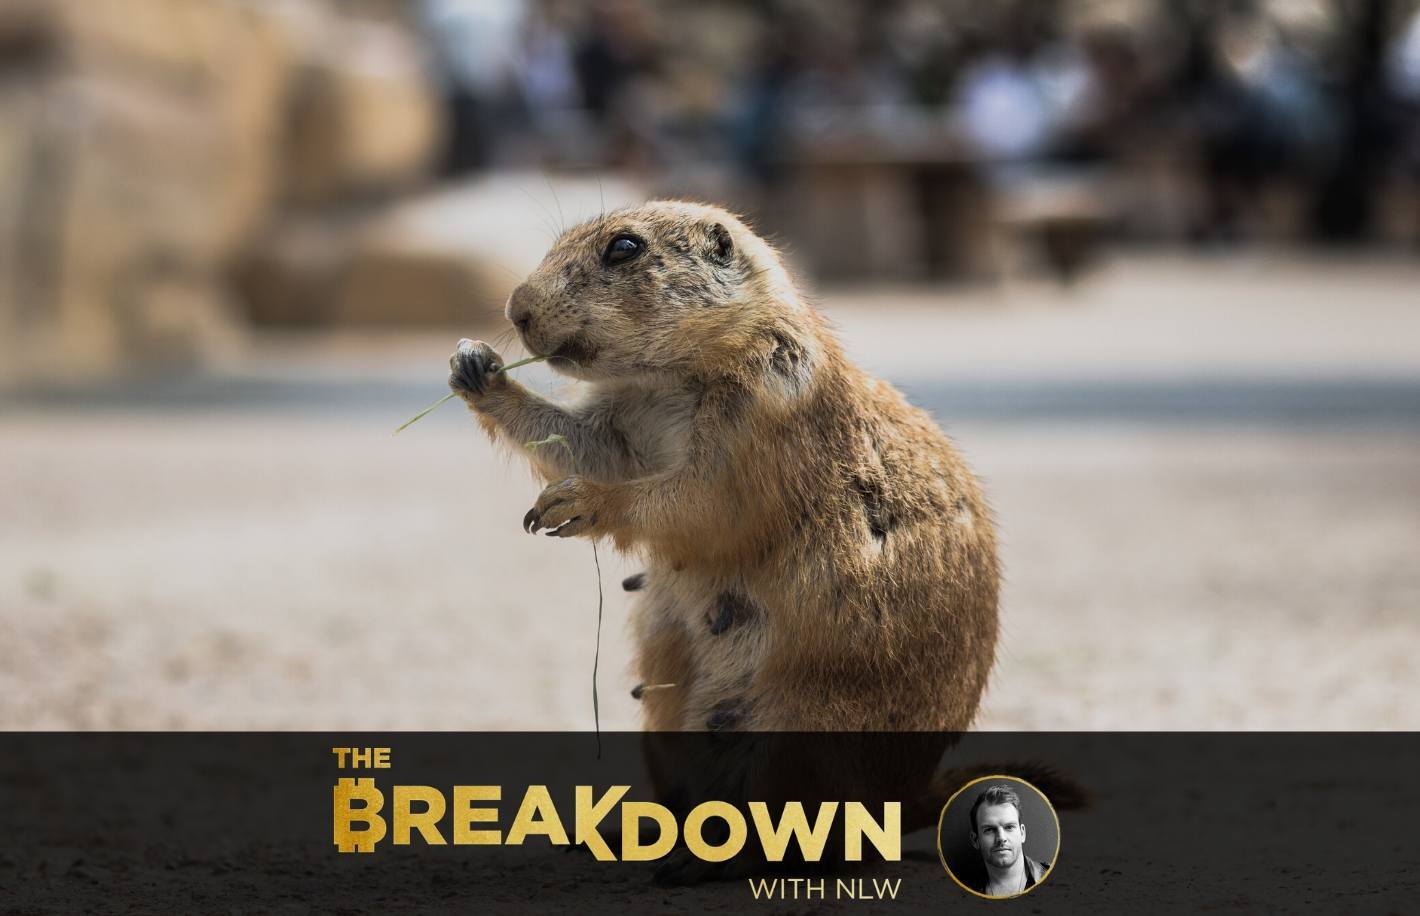 Welcome to the Groundhog Day Economic system (PS, It Sucks)